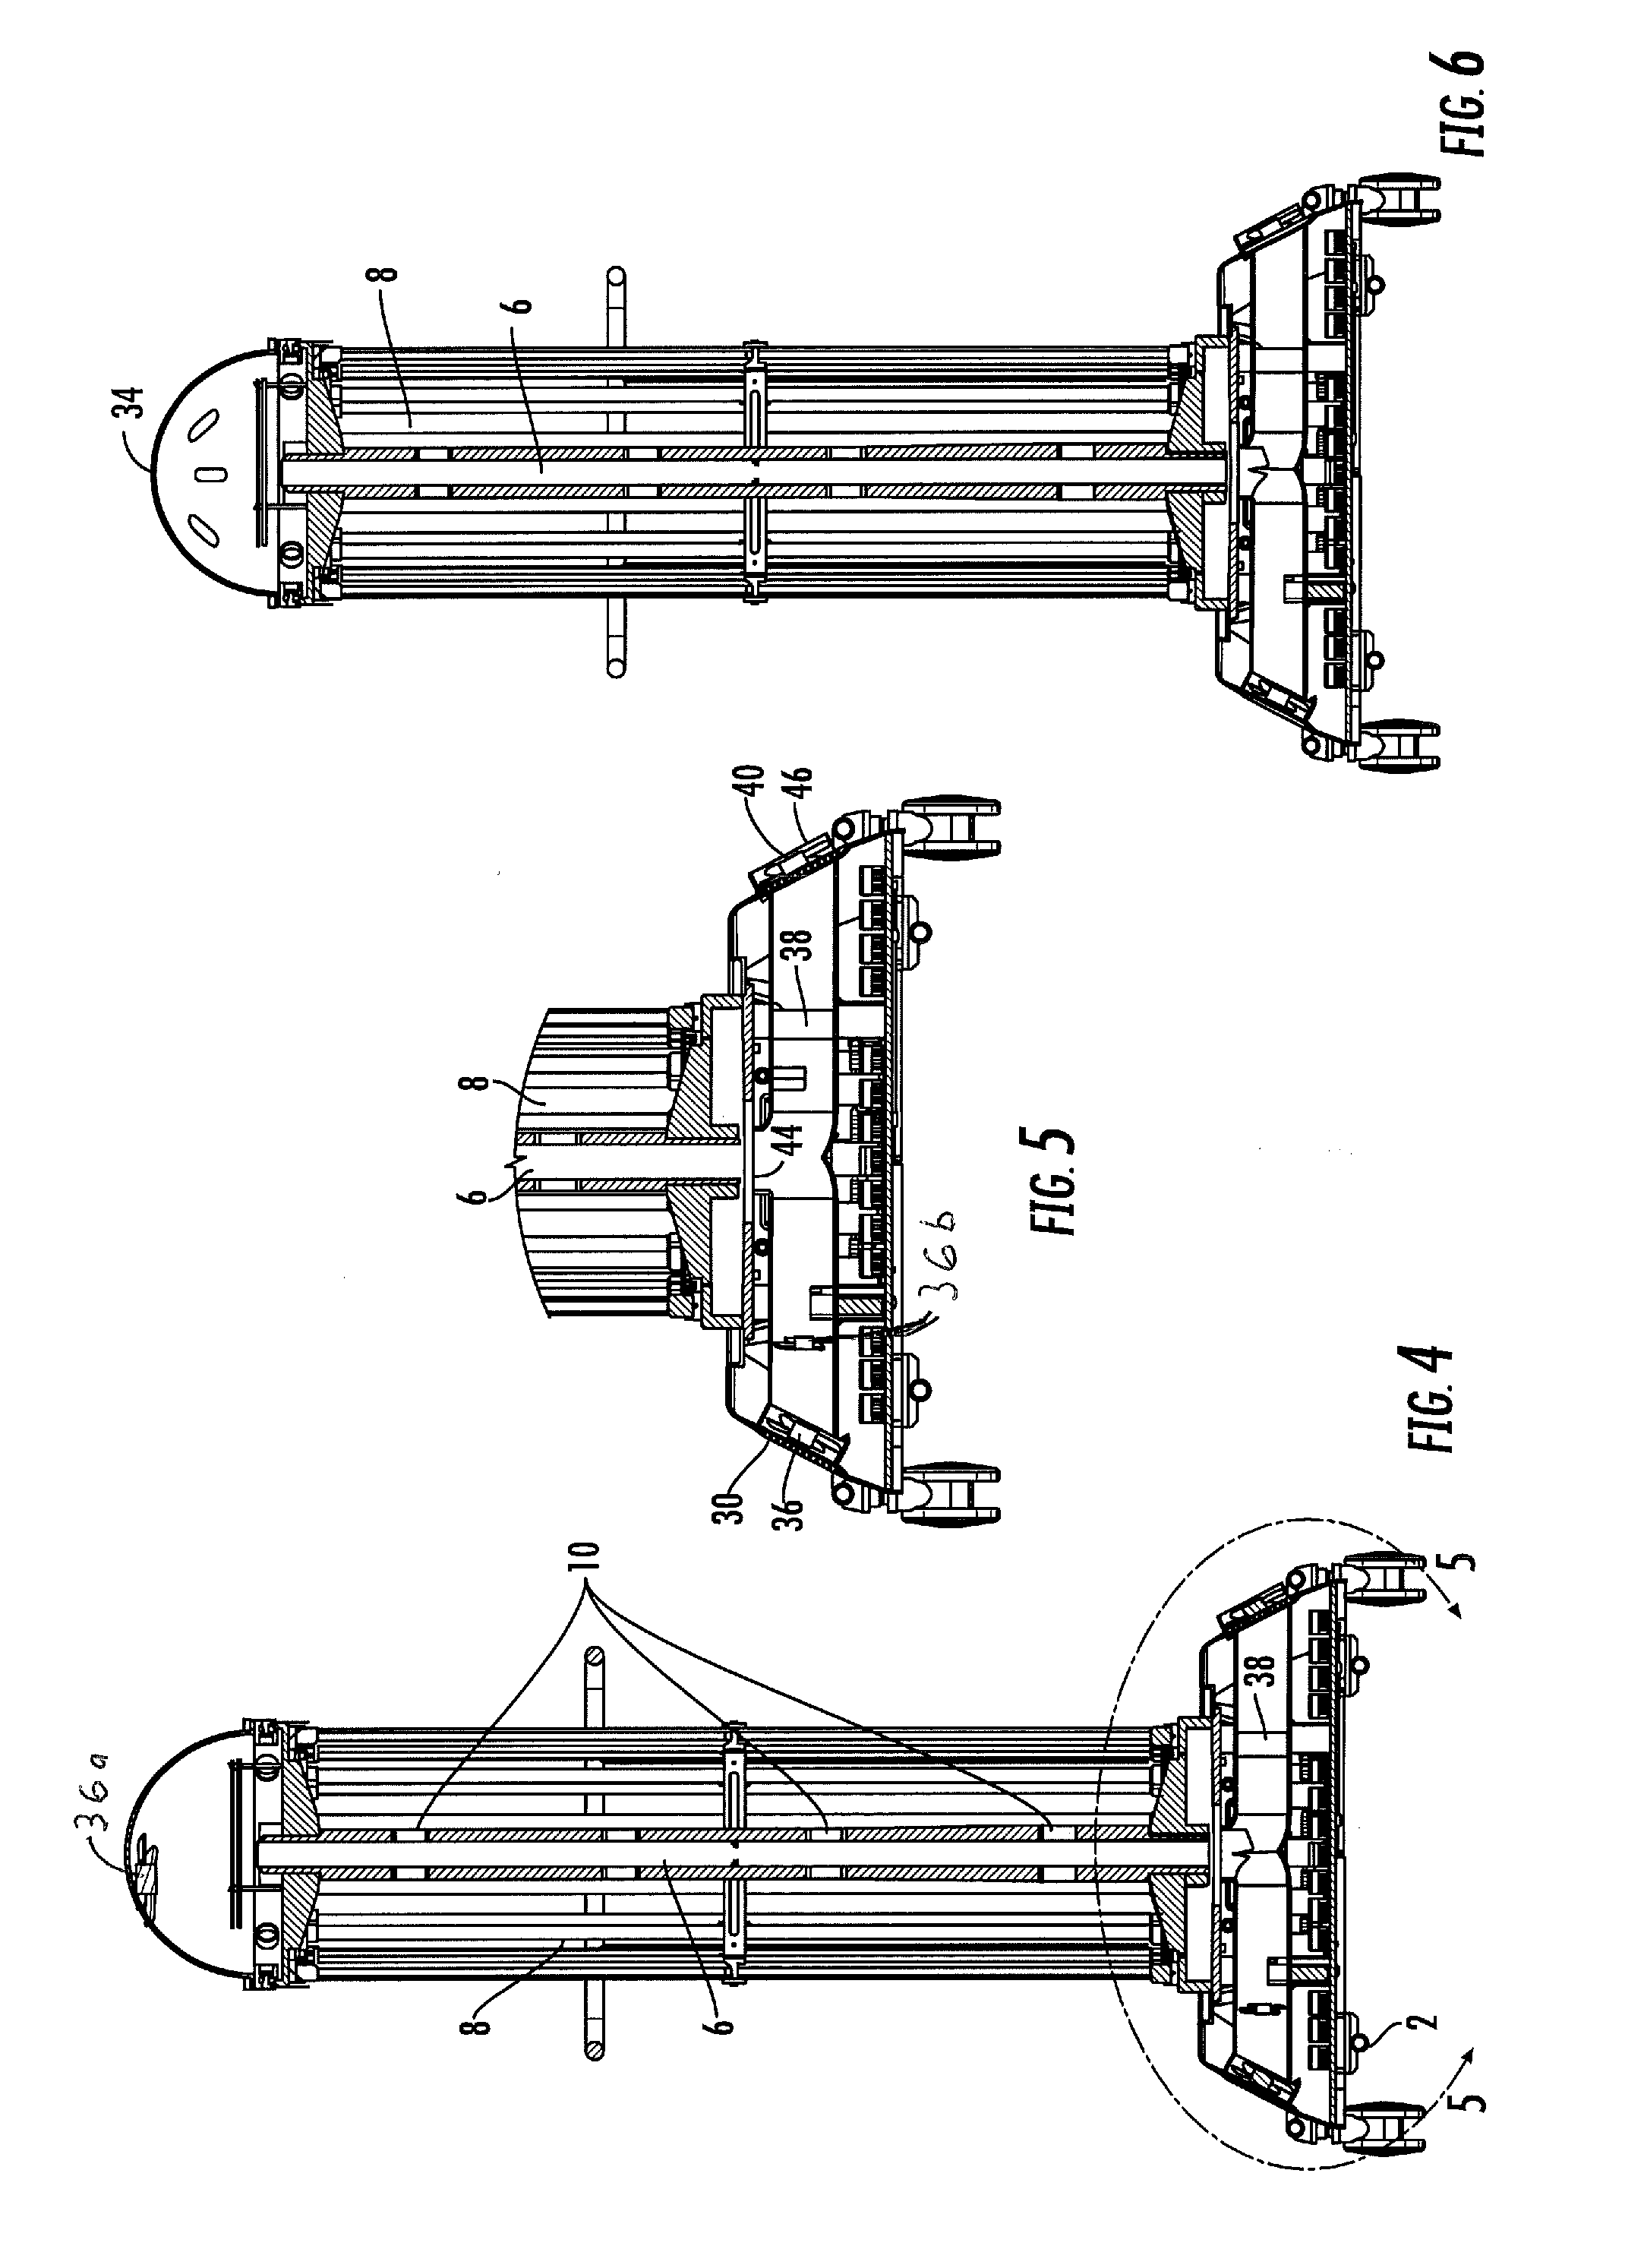 Organism control device and method